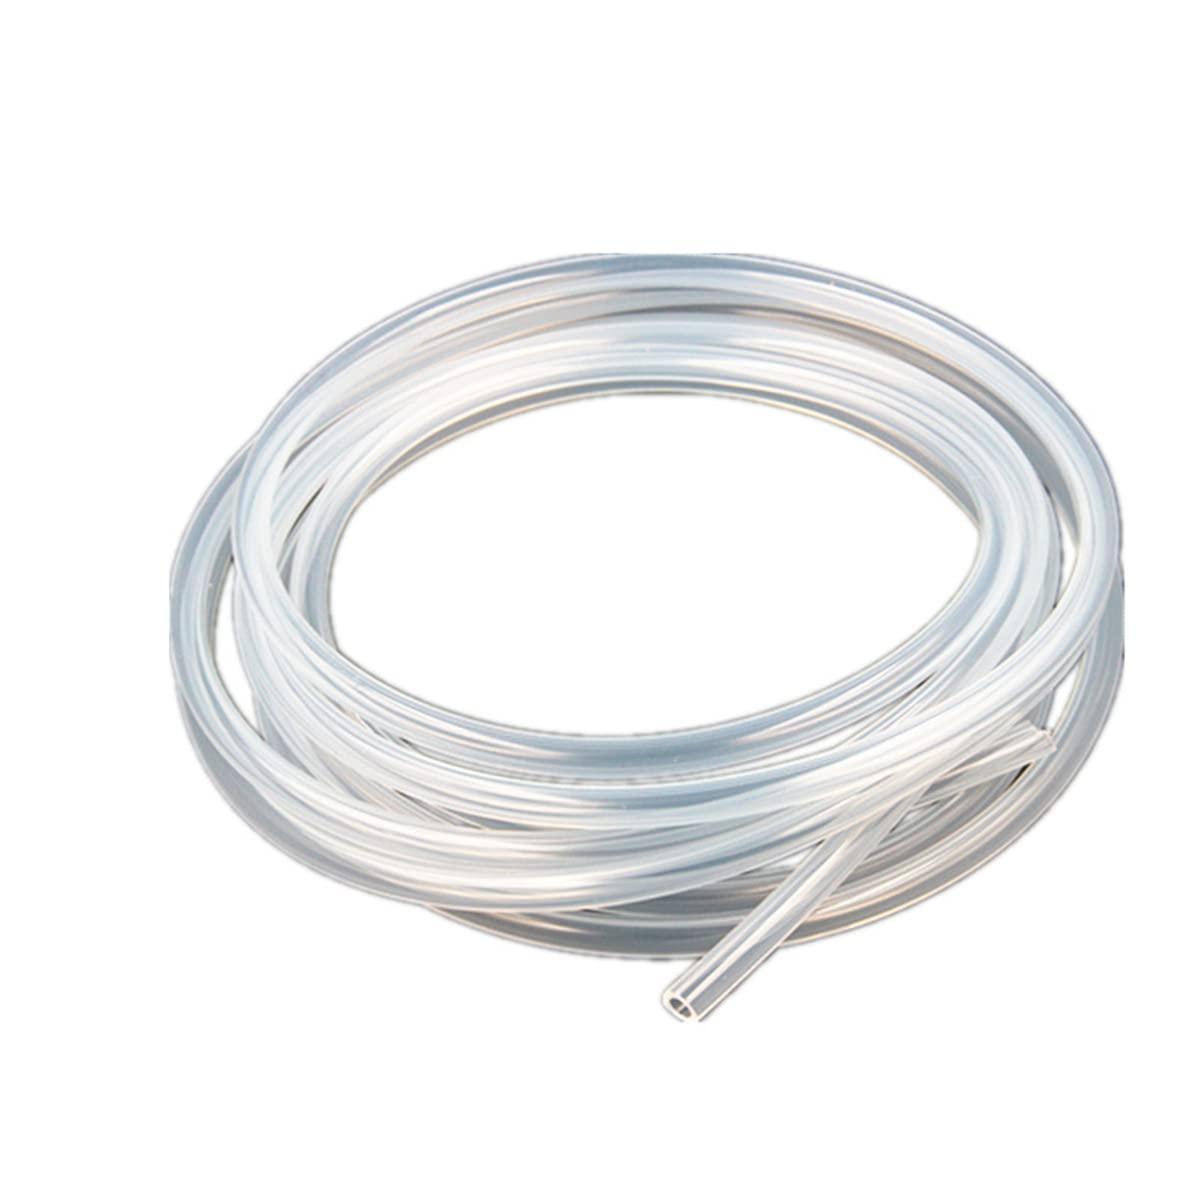 MACHSWON Silicone Tube 13mm ID 18mm OD 100.04ft Transparent Silicone Rubber Tube Silicone Tube Food Grade Air Hose for Pump Transfer 30.5m